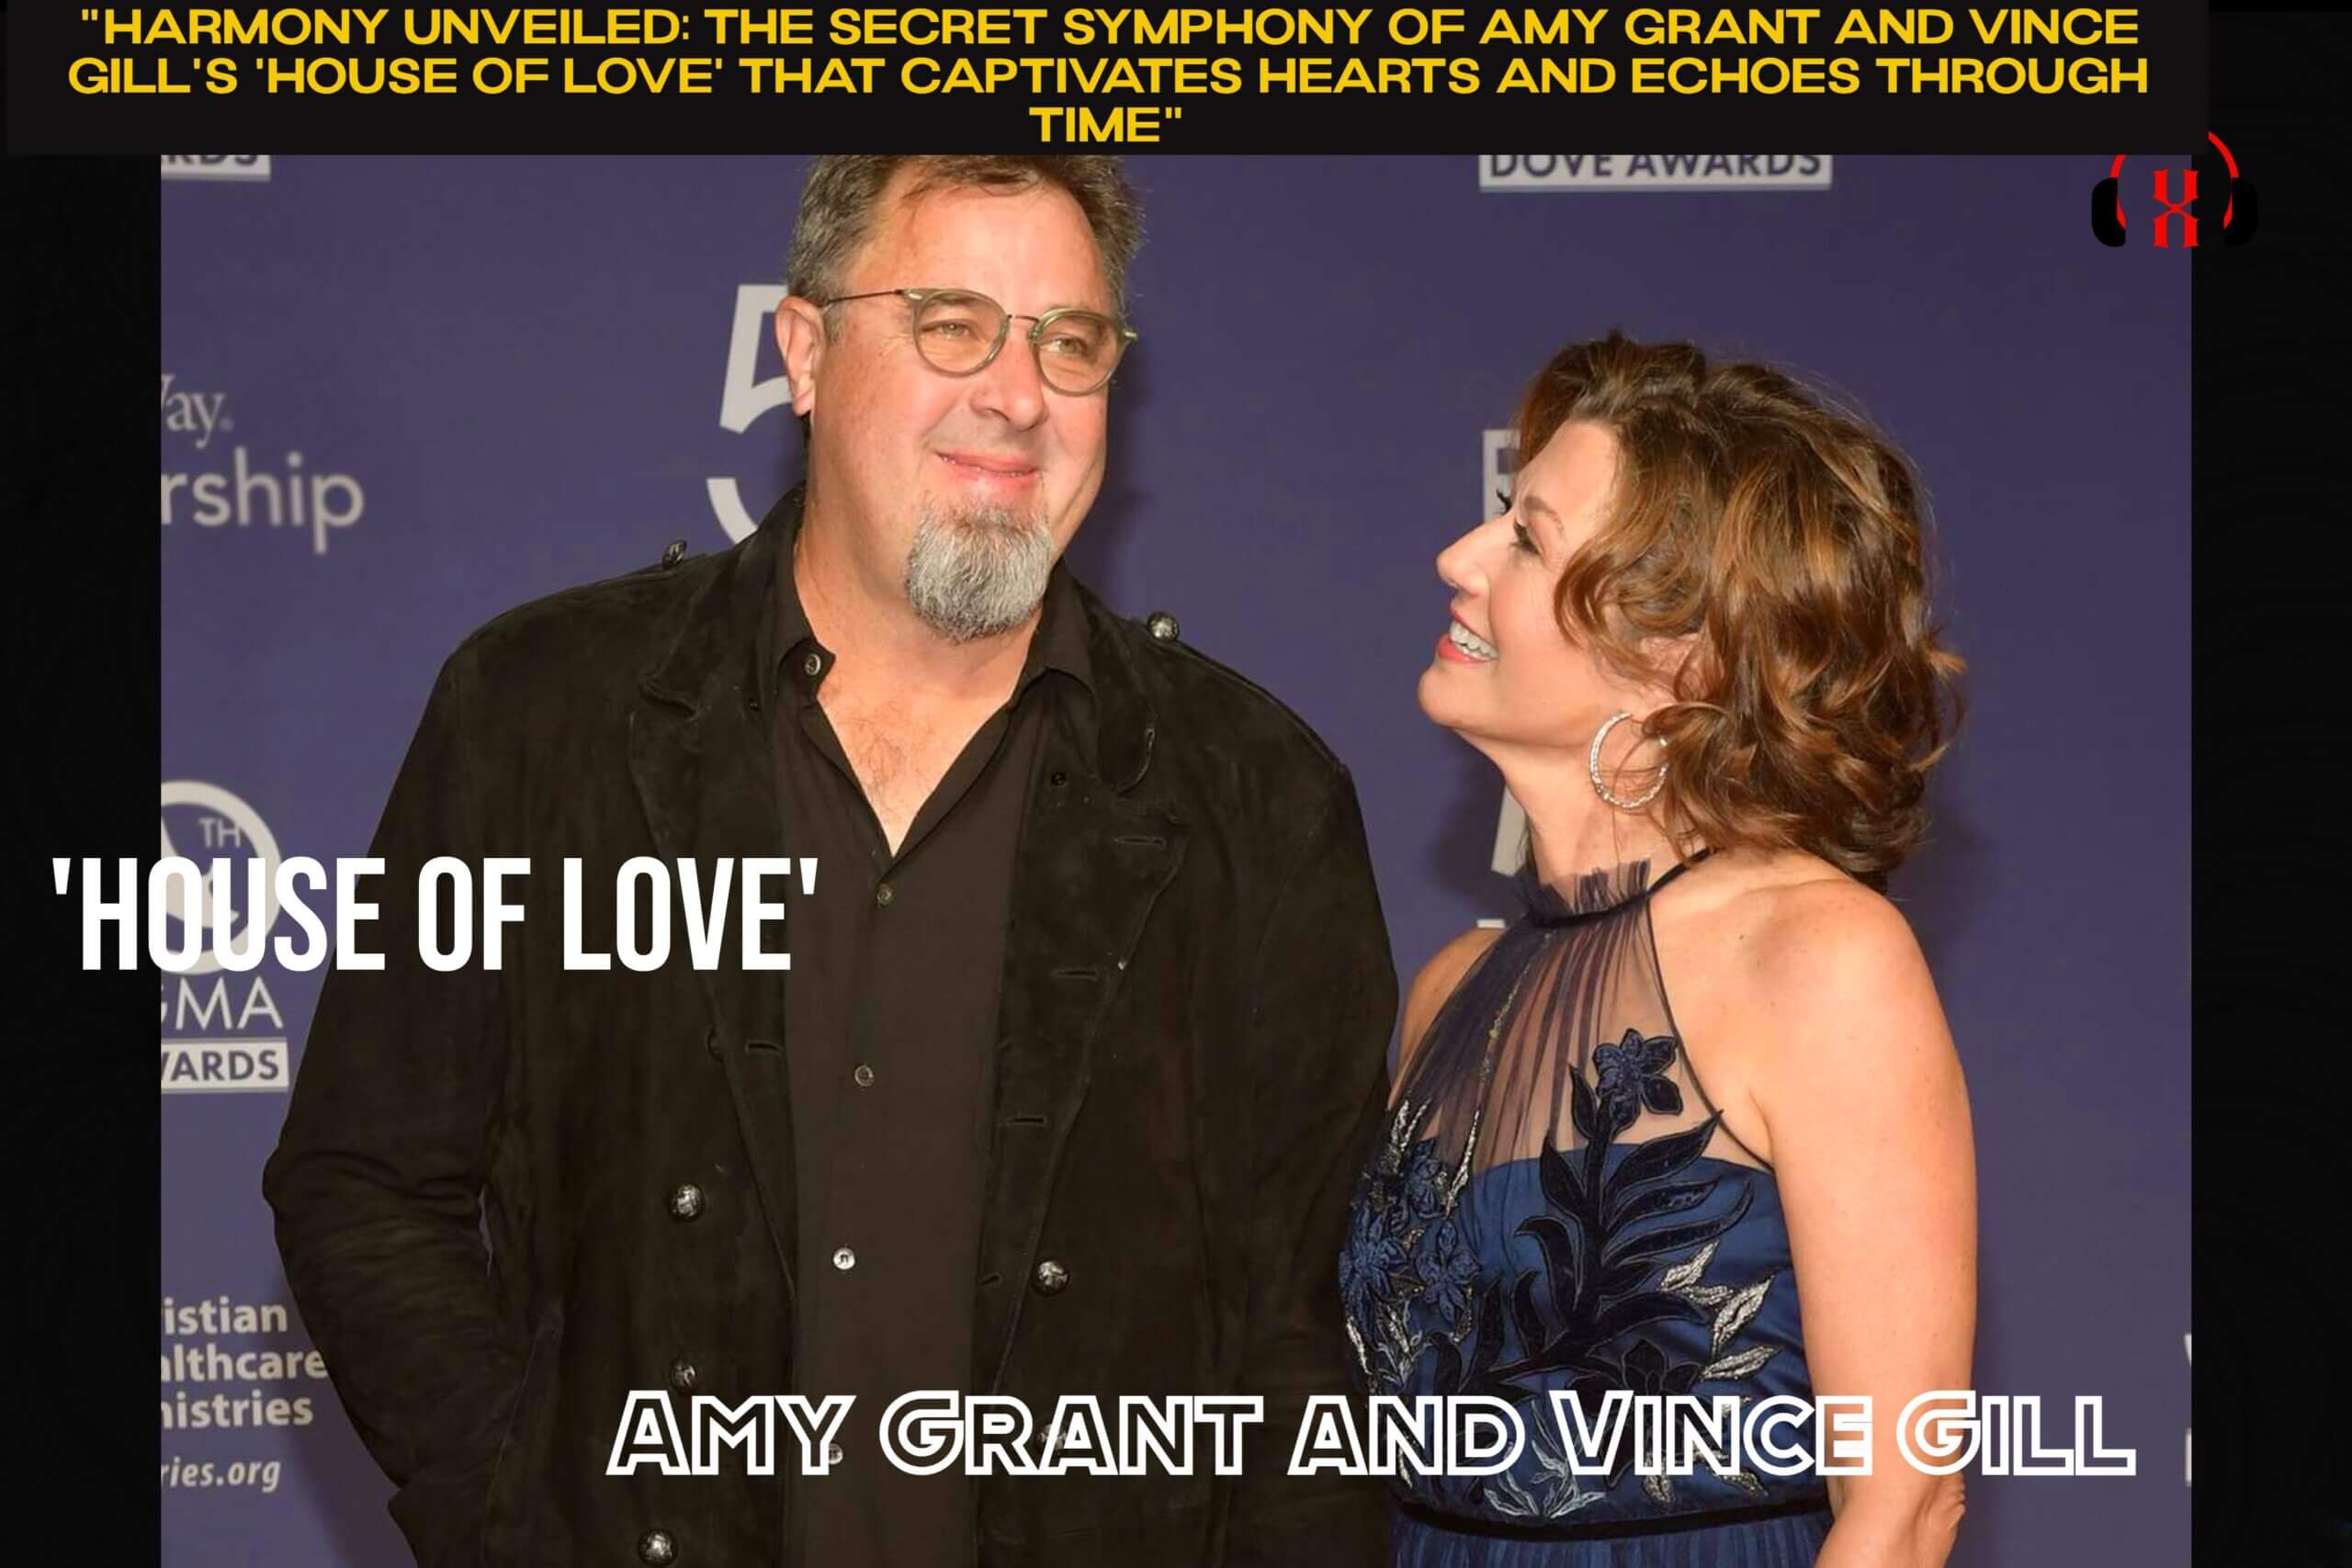 Harmony Unveiled The Secret Symphony of Amy Grant and Vince Gill's 'House of Love' That Captivates Hearts and Echoes Through Time